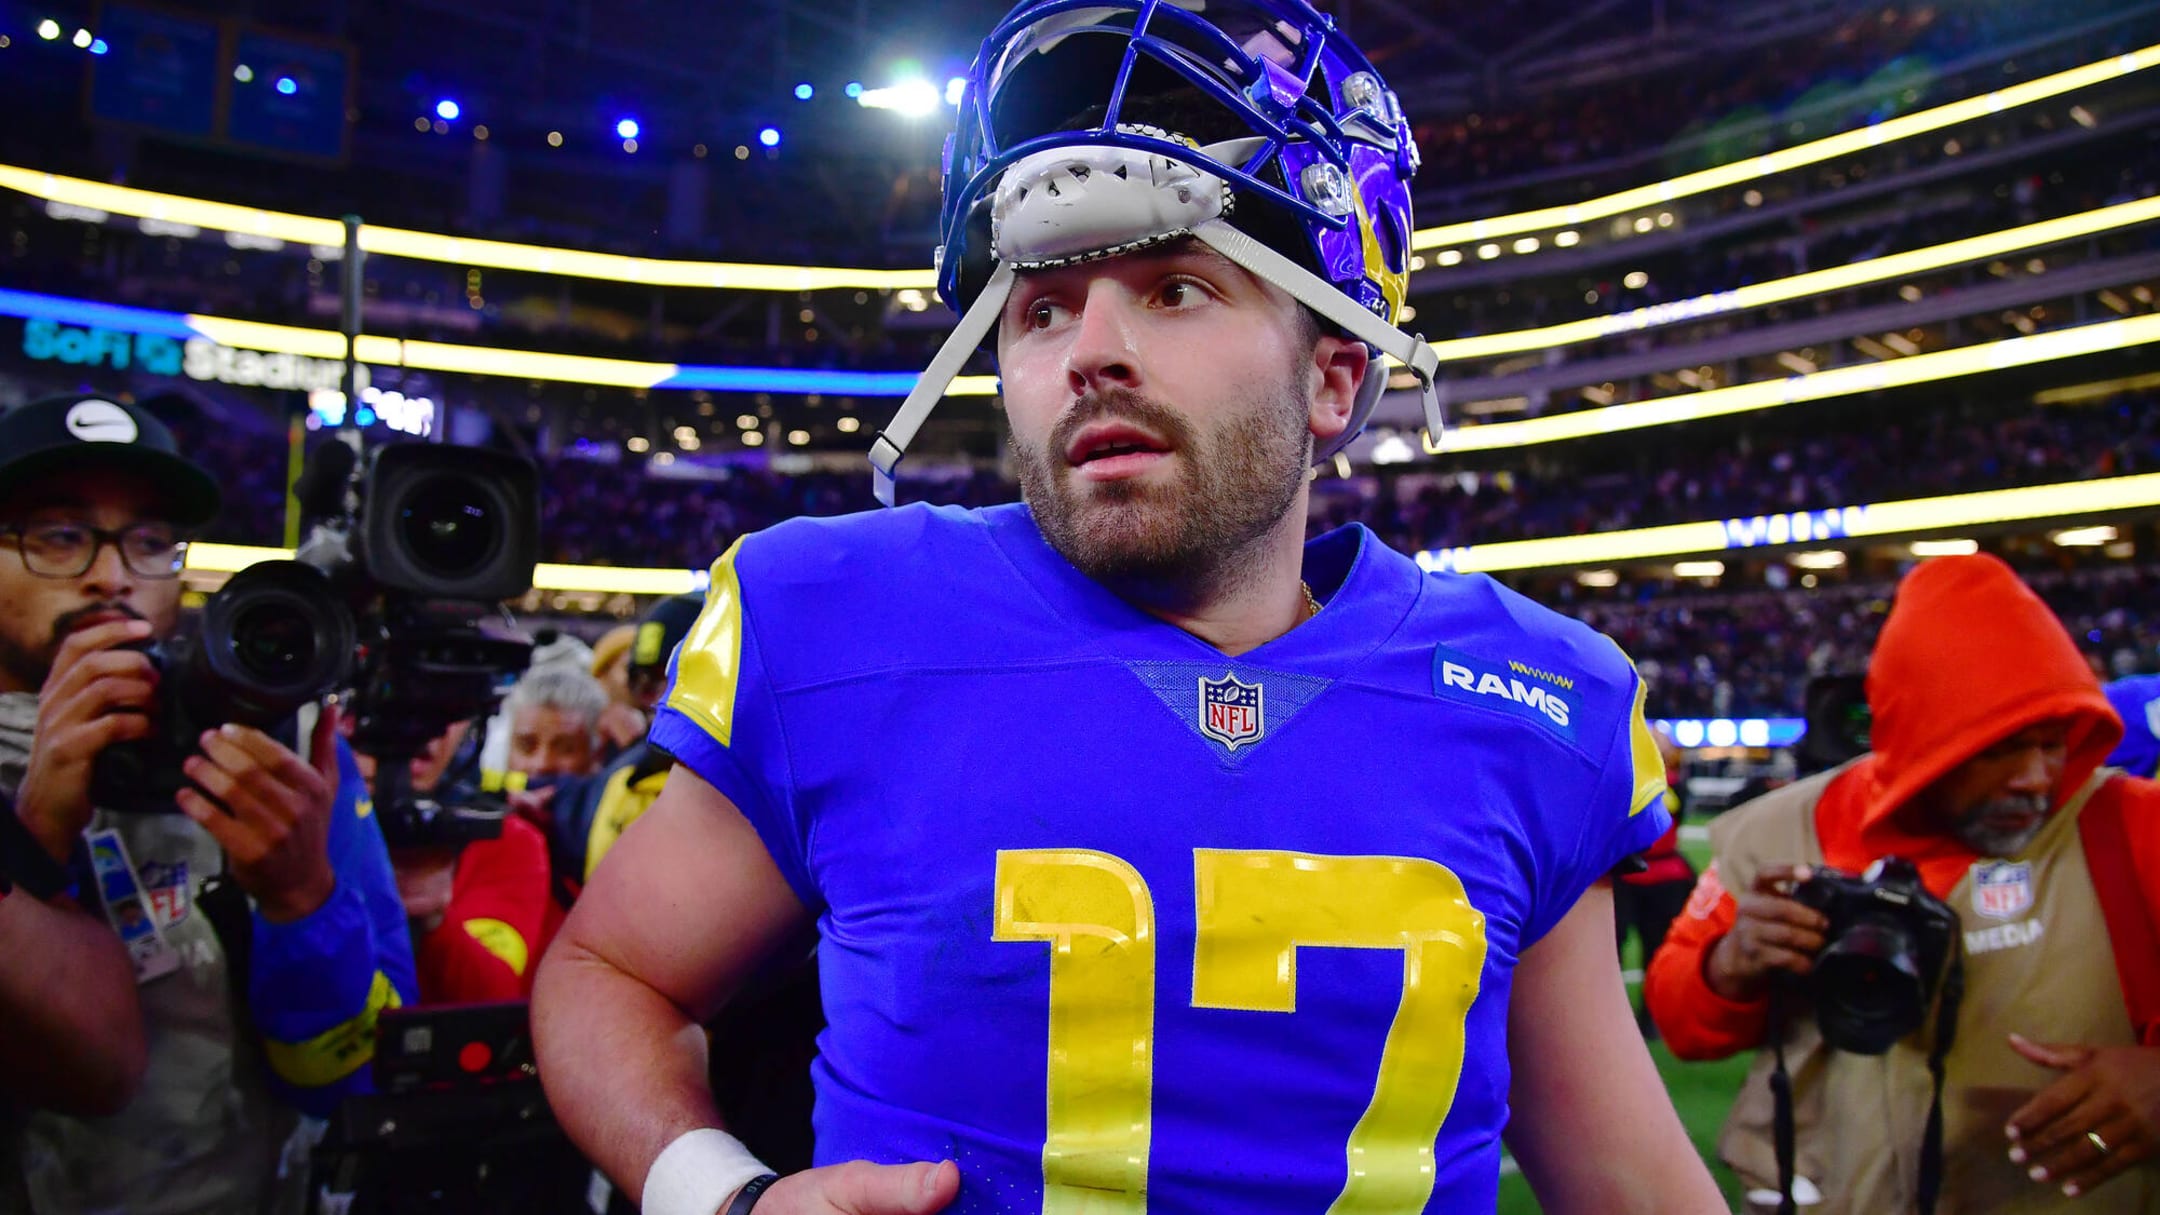 Fans React to the Los Angeles Rams' New Uniforms